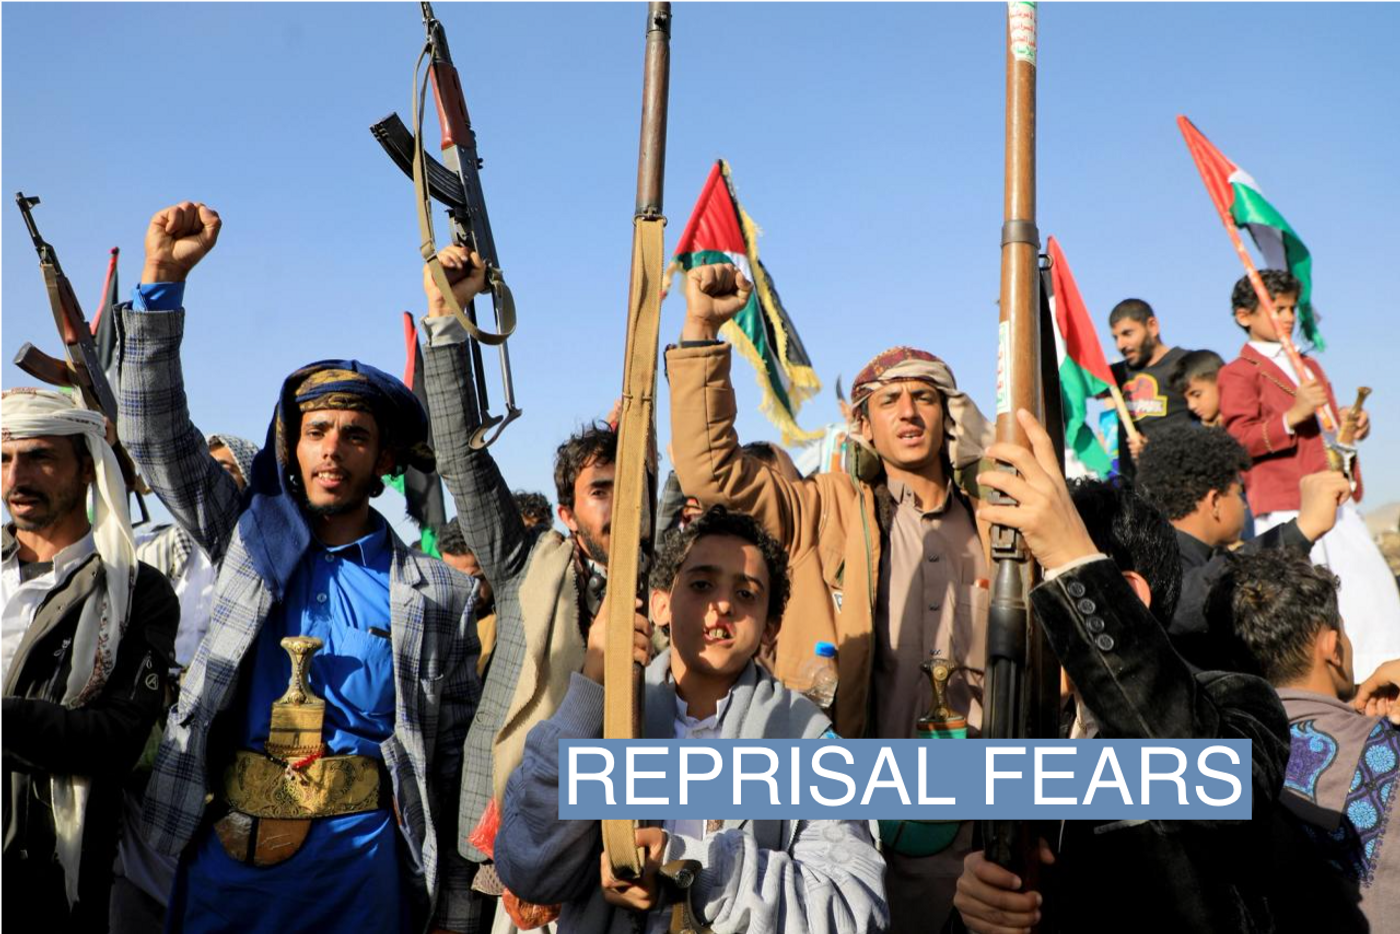 Houthi fighters brandish their weapons during a protest following US and British forces strikes, in the Huthi-controlled capital Sanaa on January 12, 2024 amid the ongoing battles between Israel and the militant Hamas group in Gaza. US and British forces struck rebel-held Yemen early on January 12, after weeks of disruptive attacks on Red Sea shipping by the Iran-backed Huthis who say they act in solidarity with Gaza. The pre-dawn air strikes add to escalating fears of wider conflict in the region, where violence involving Tehran-aligned groups in Yemen as well as Lebanon, Iraq and Syria has surged since the Israel-Hamas was began in early October. (Photo by MOHAMMED HUWAIS / AFP) (